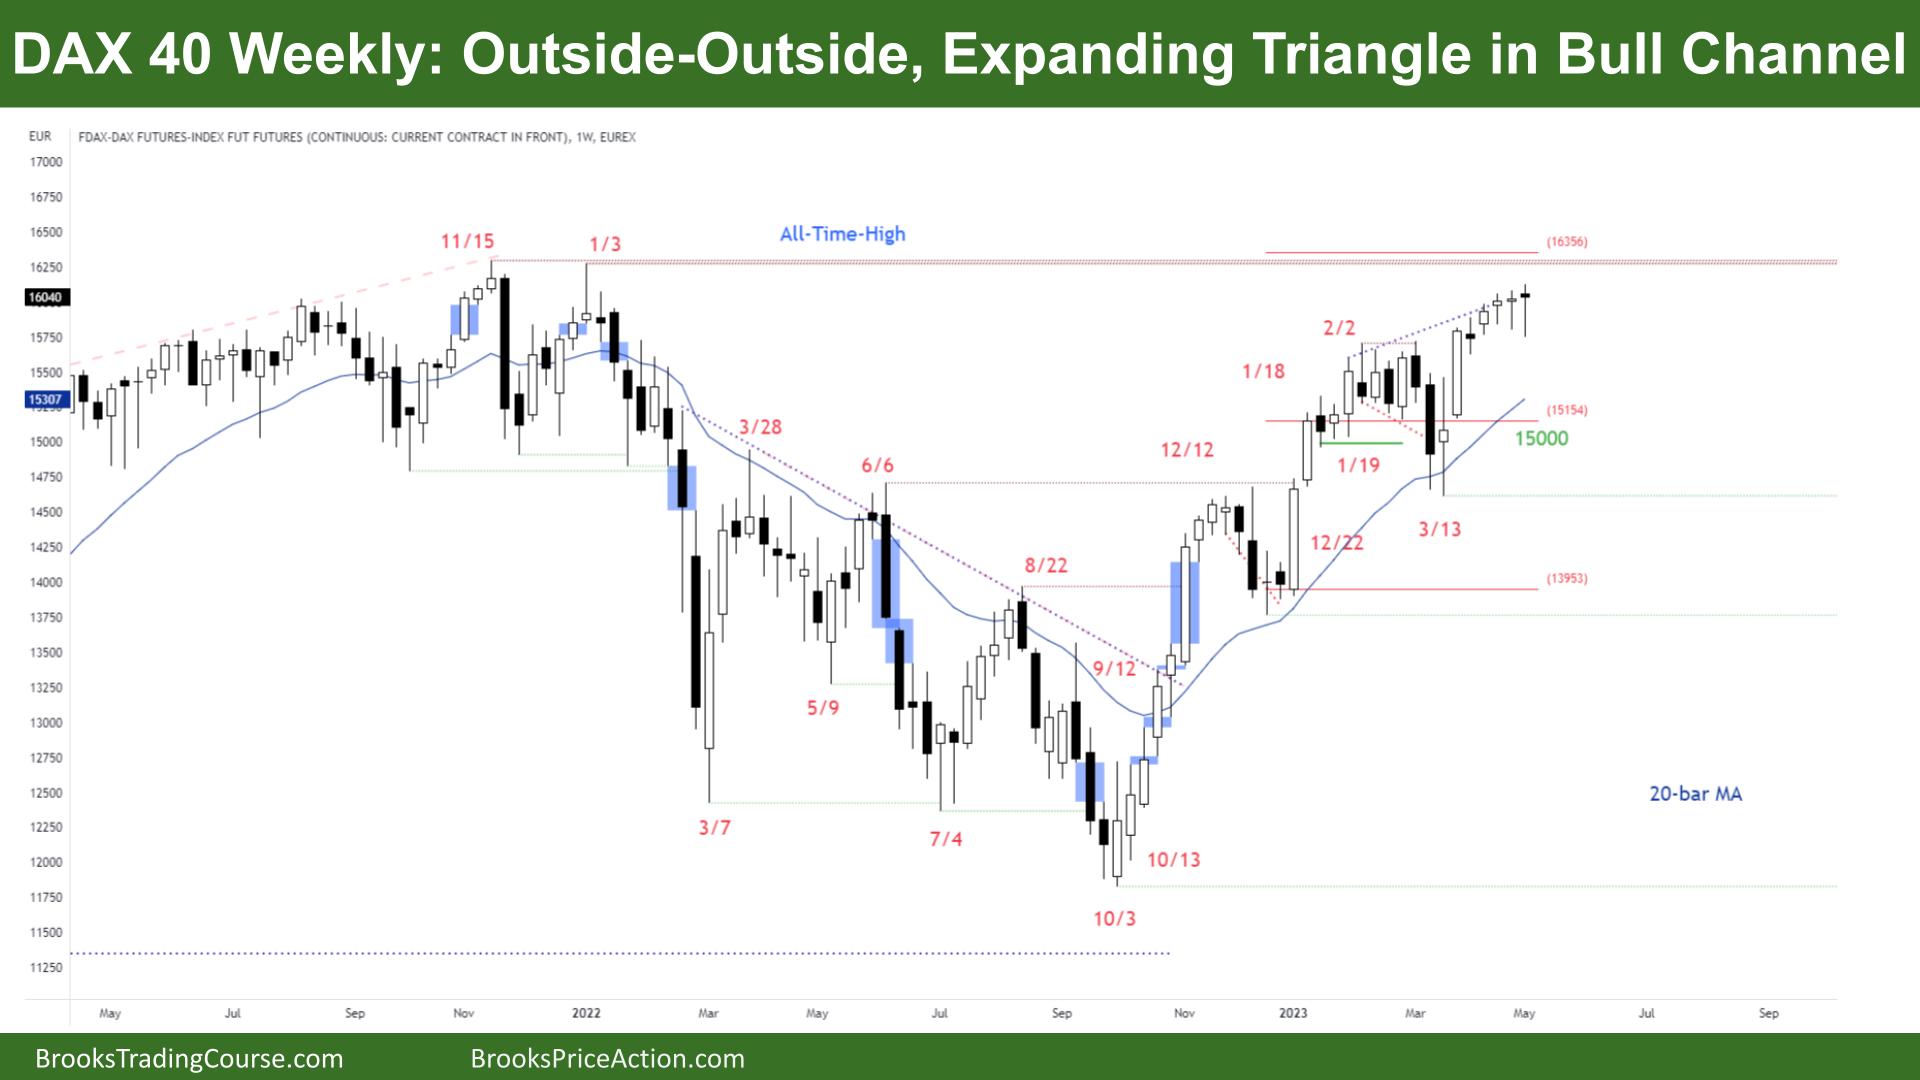 DAX 40 Outside-Outside, Expanding Triangle in Bull Channel